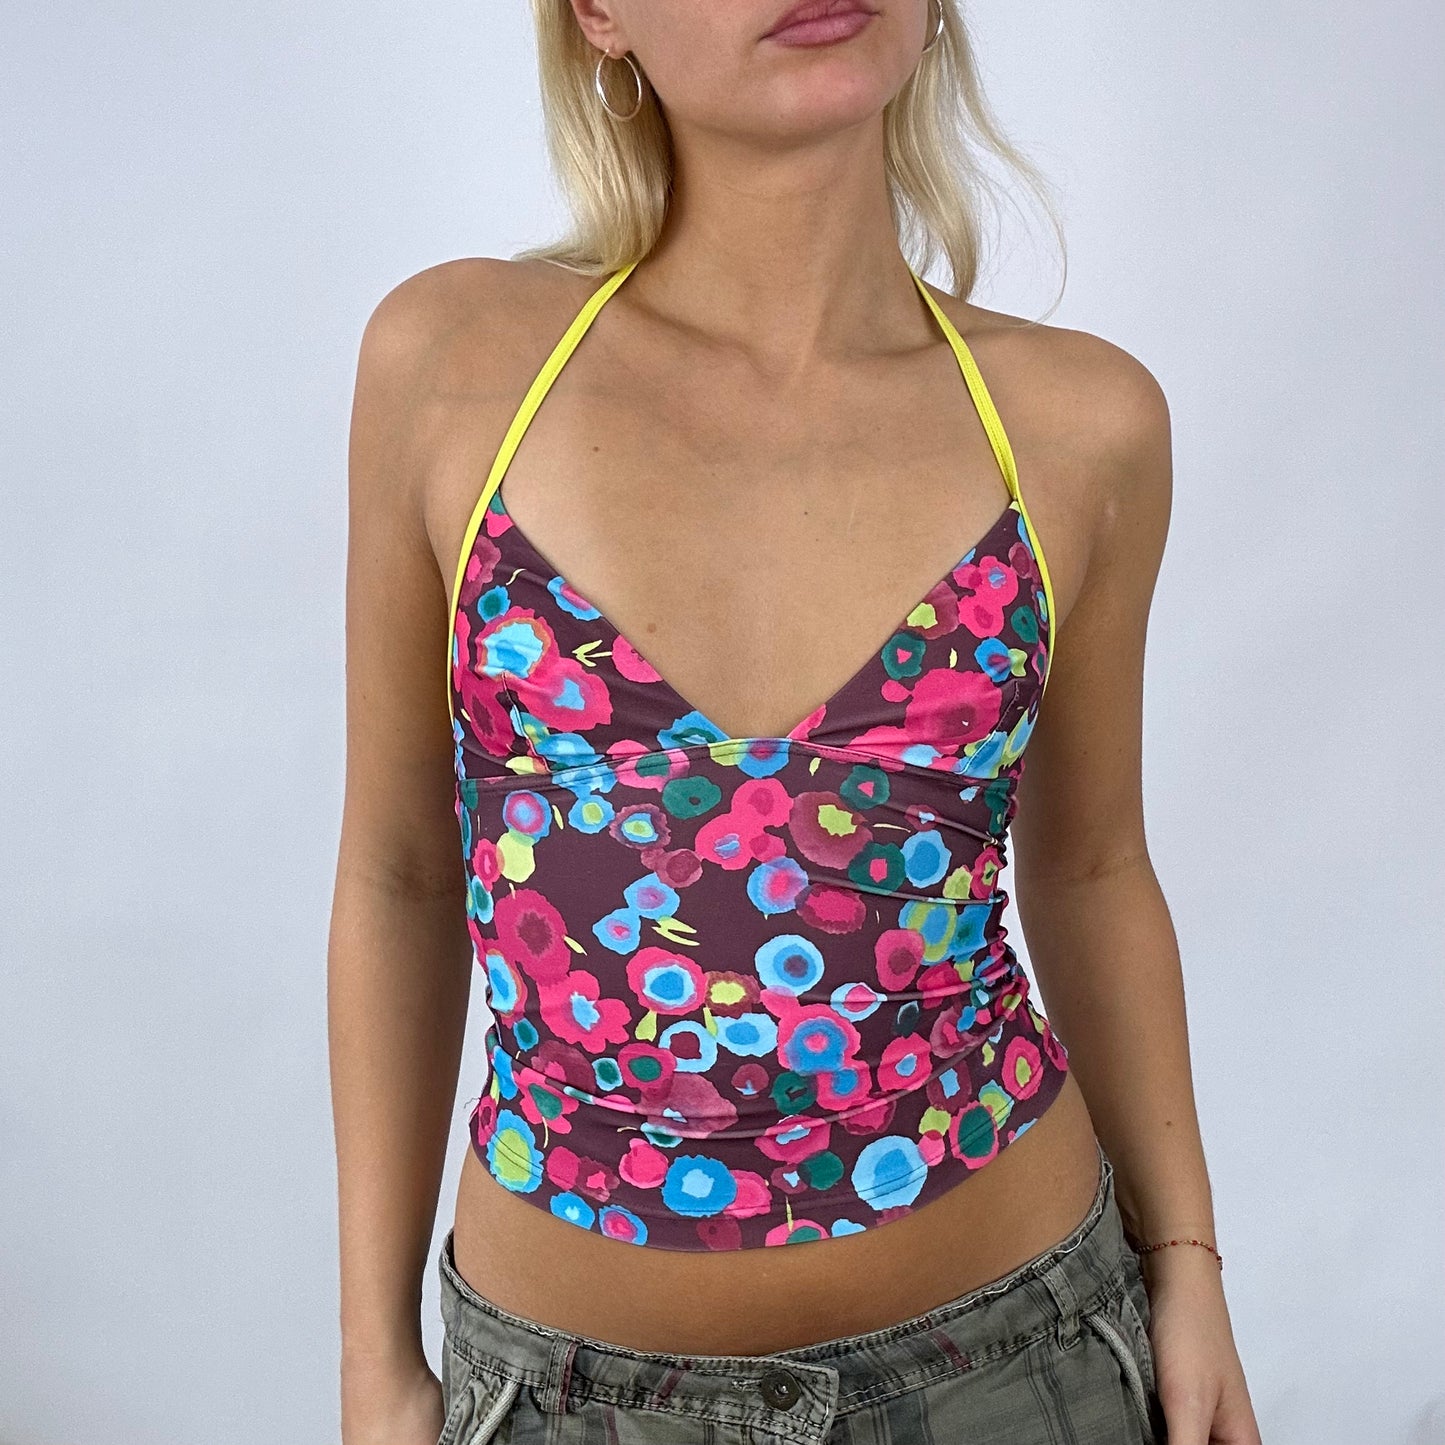 EUROPEAN SUMMER DROP | small brown floral tankini style top